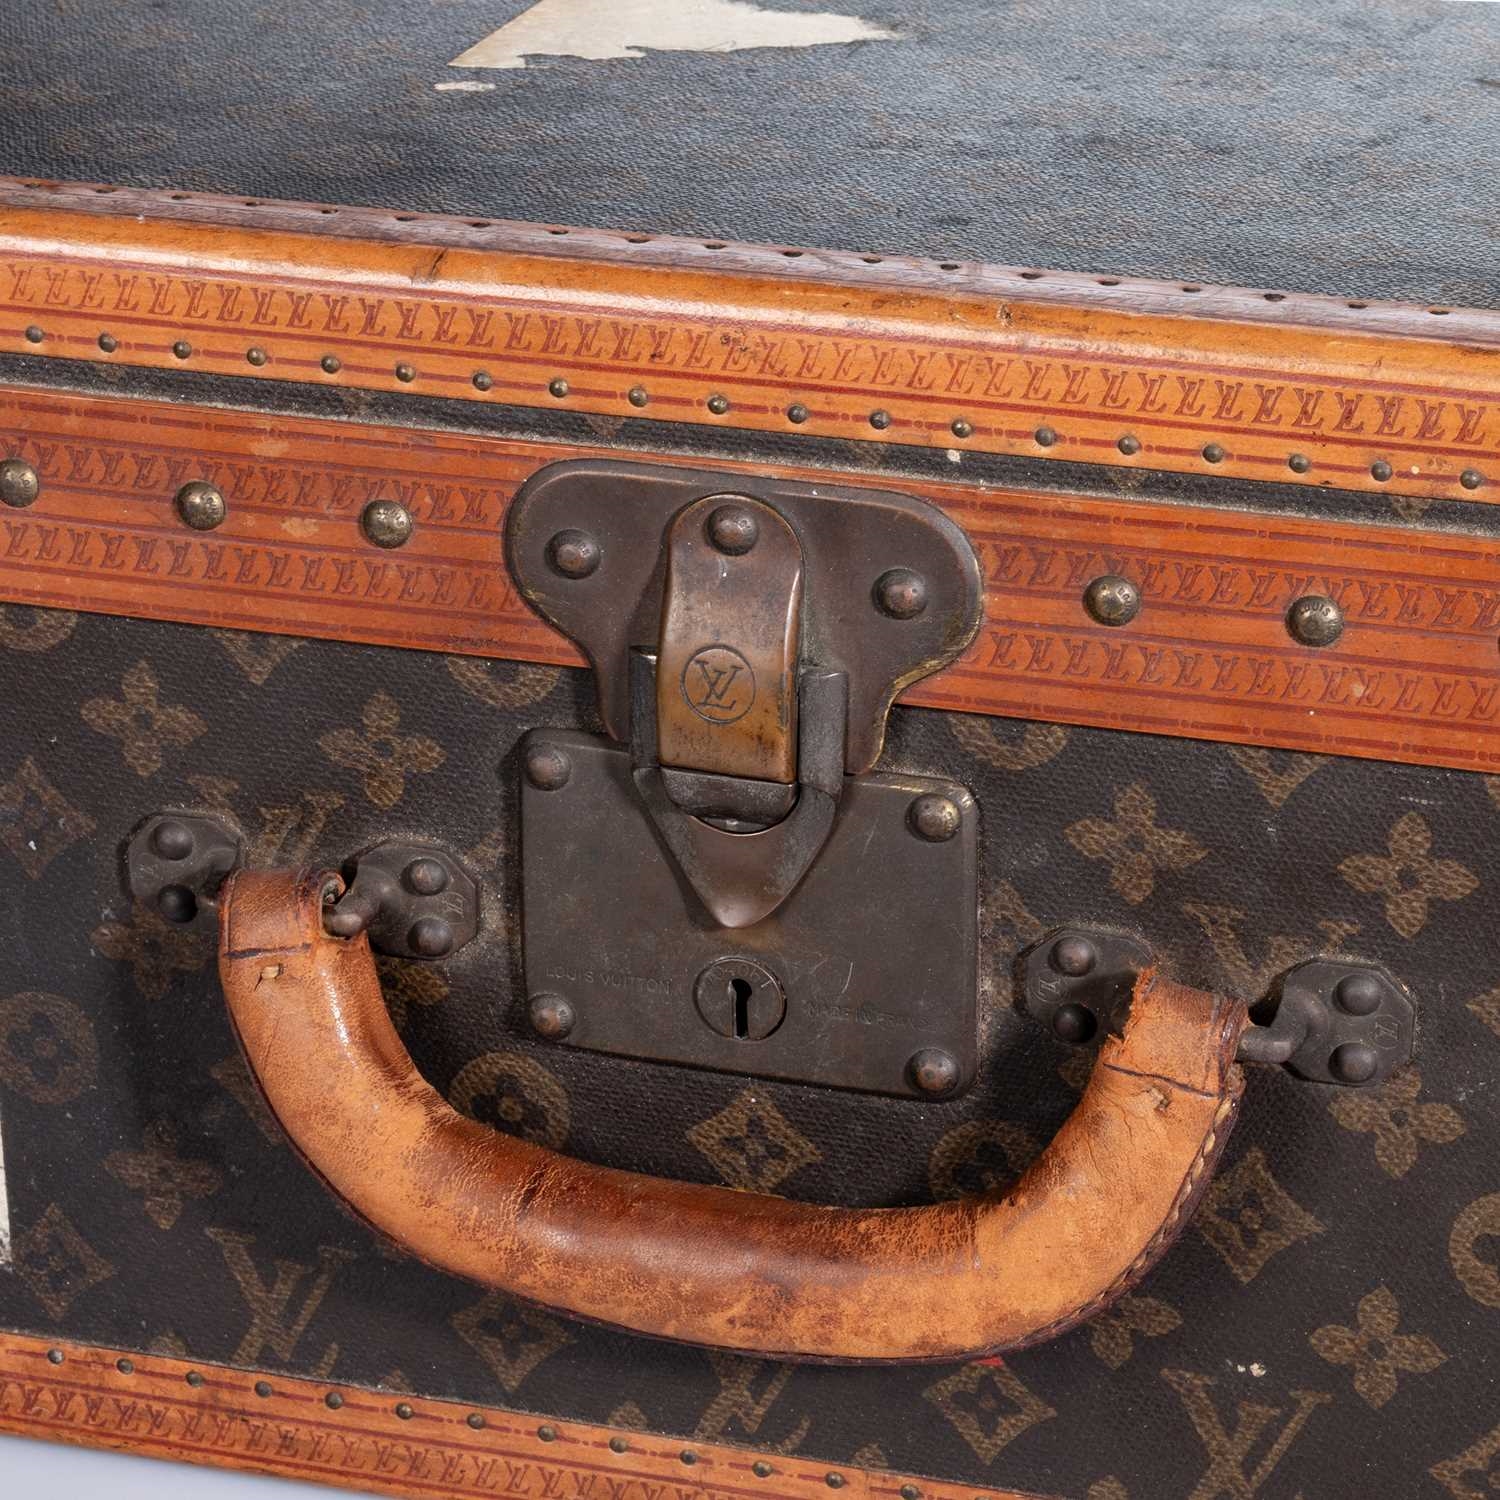 A PAIR OF BROWN MONOGRAM CANVAS HARDSIDED SUITCASES, LOUIS VUITTON, CIRCA  1990